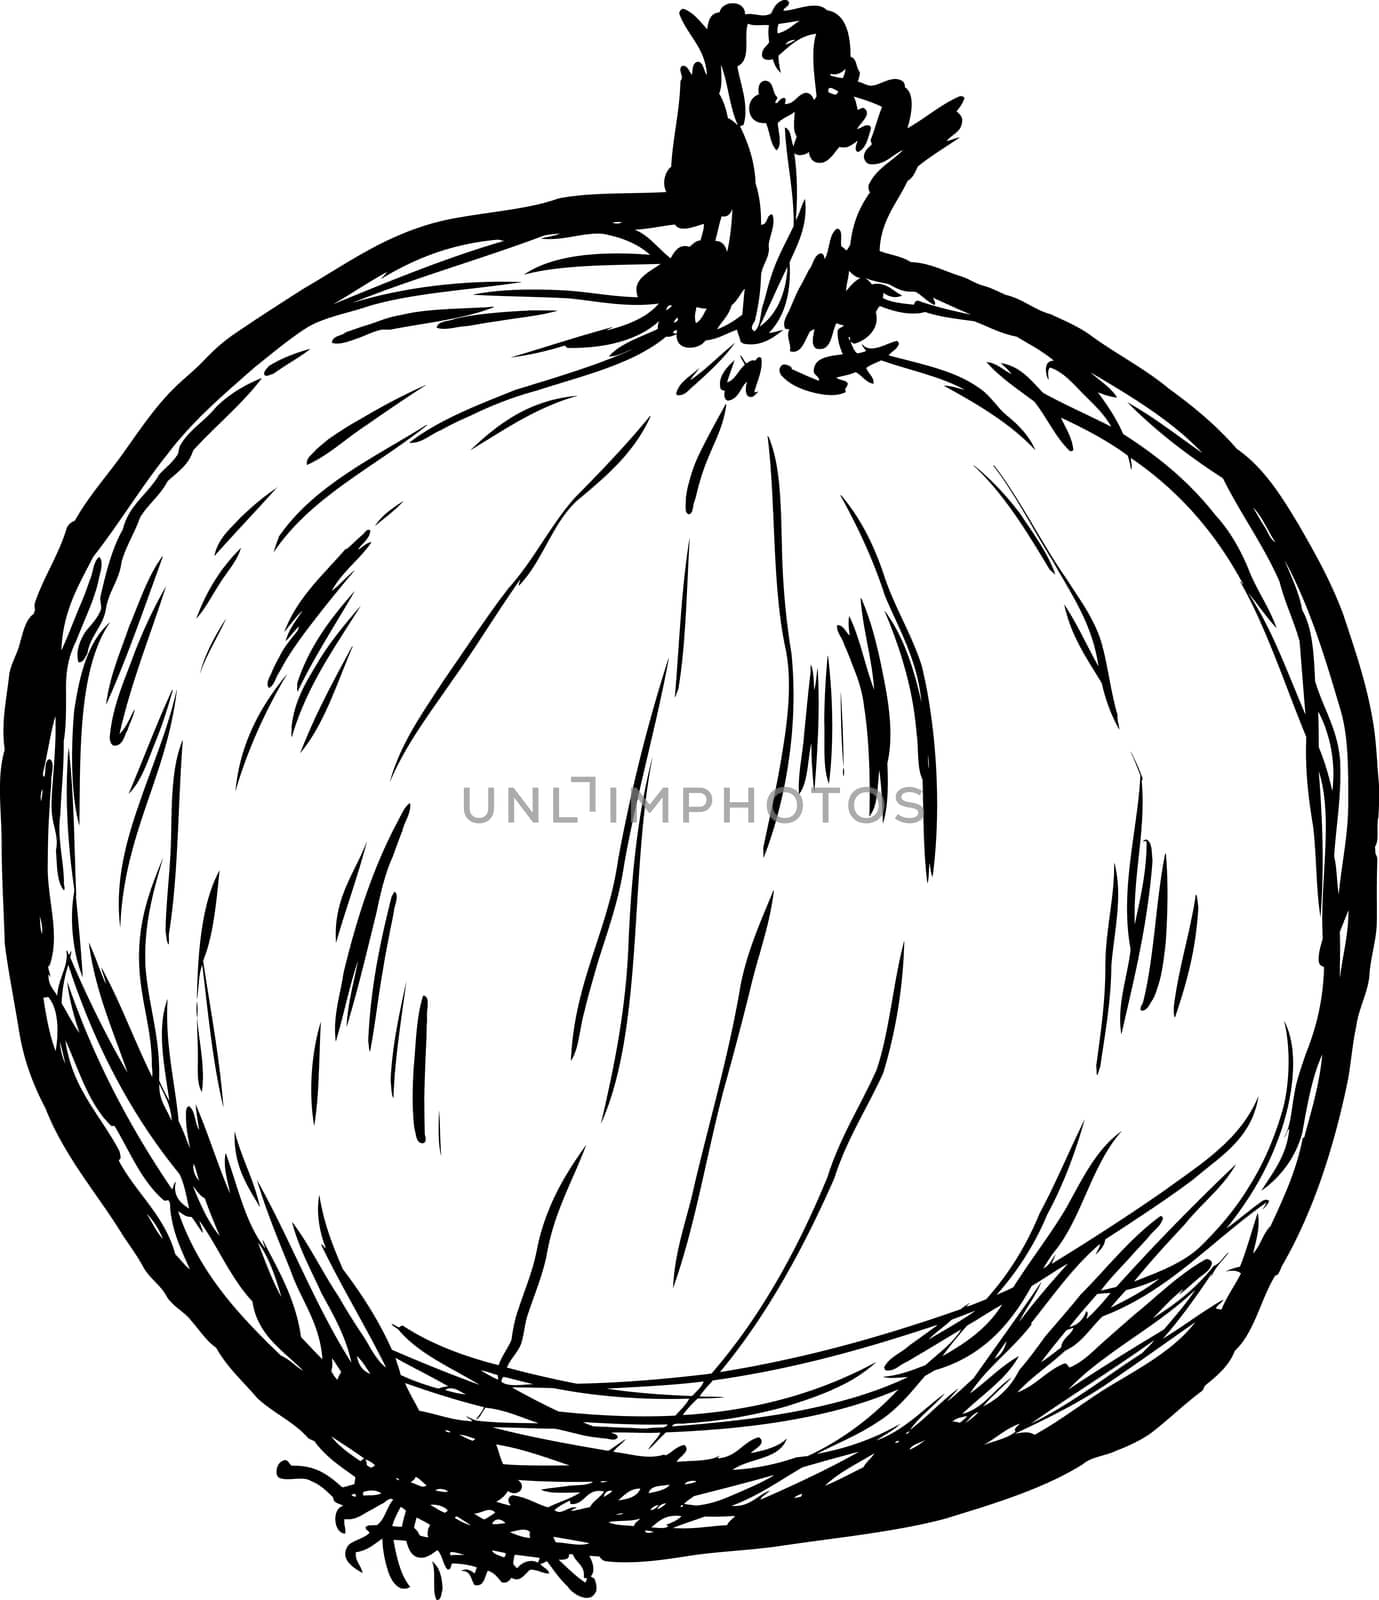 Outline sketch of single whole raw onion cartoon over white background